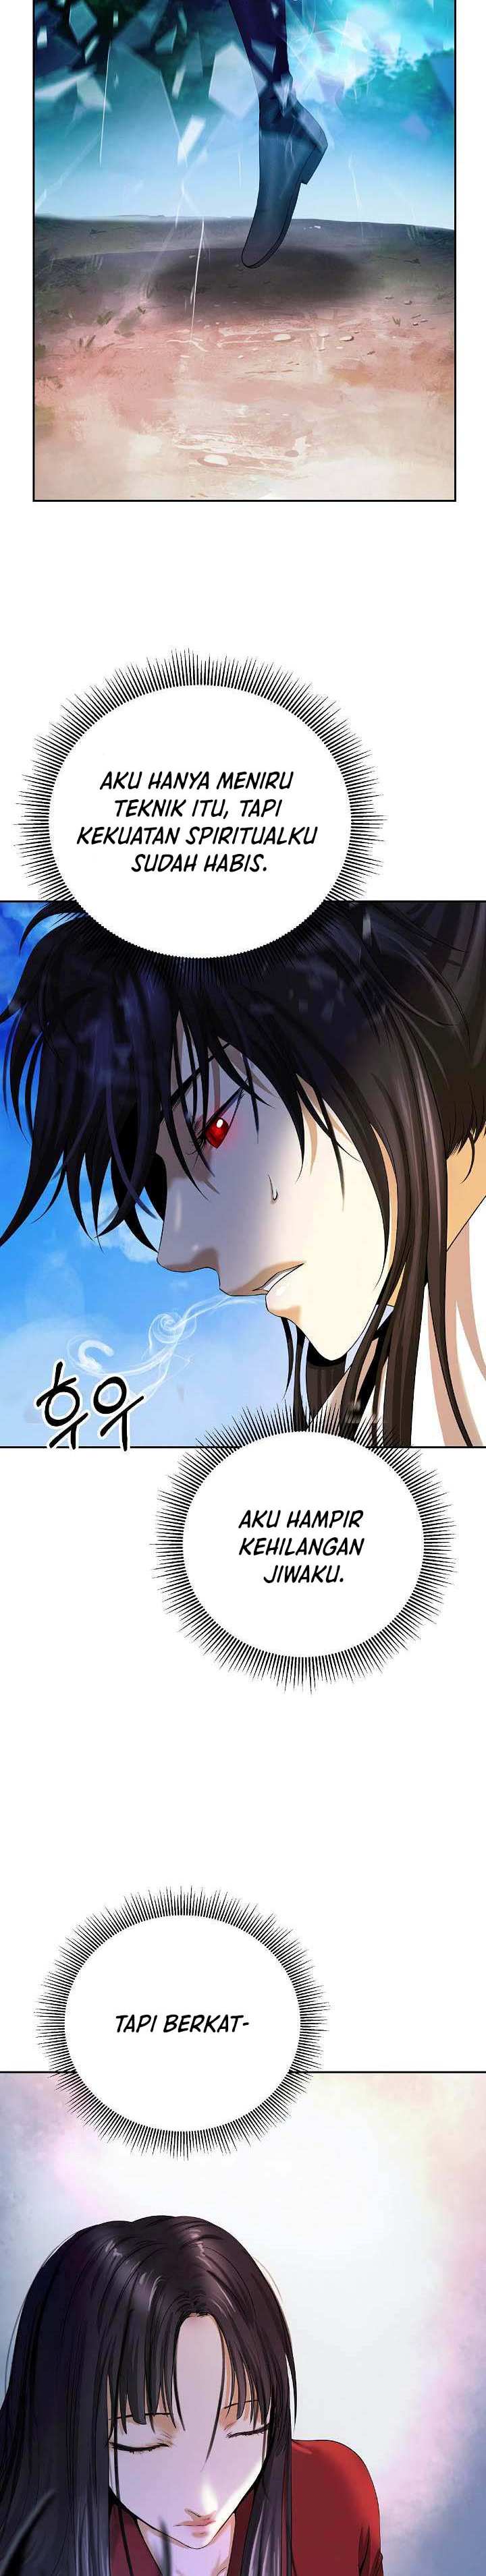 Cystic Story (Call The Spear) Chapter 90 - 327